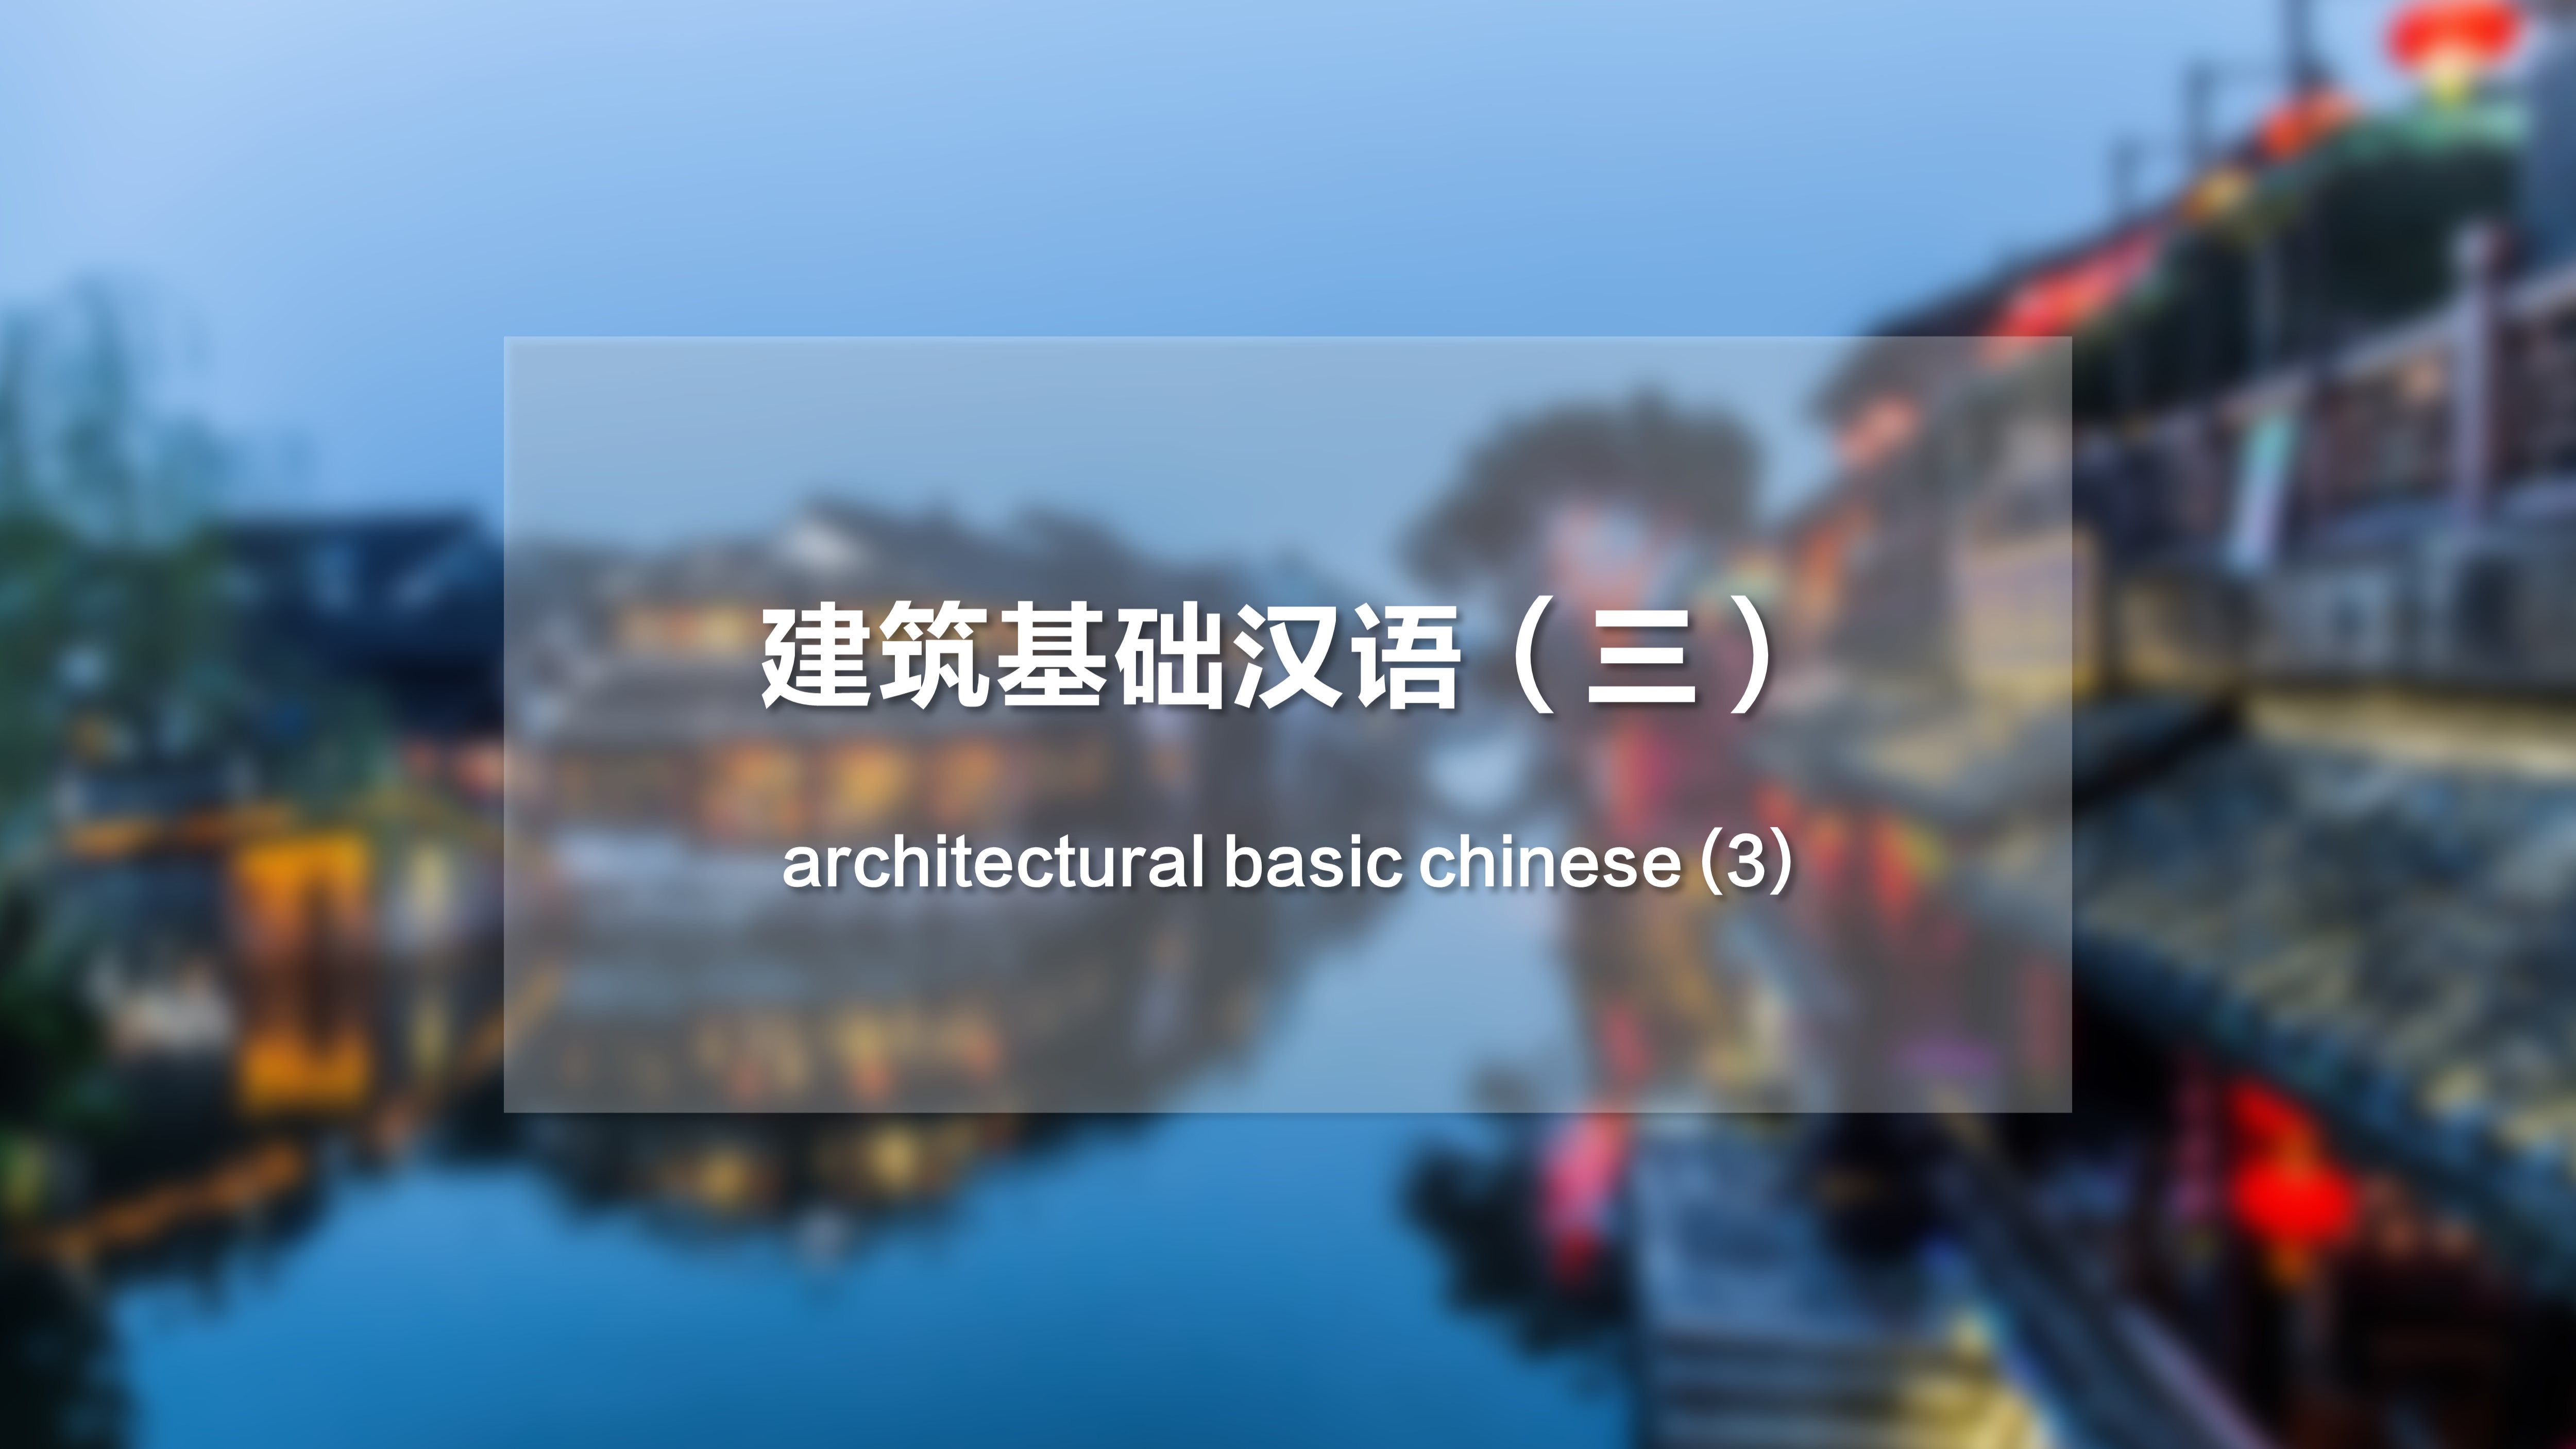 Architectural Basic Chinese (3)